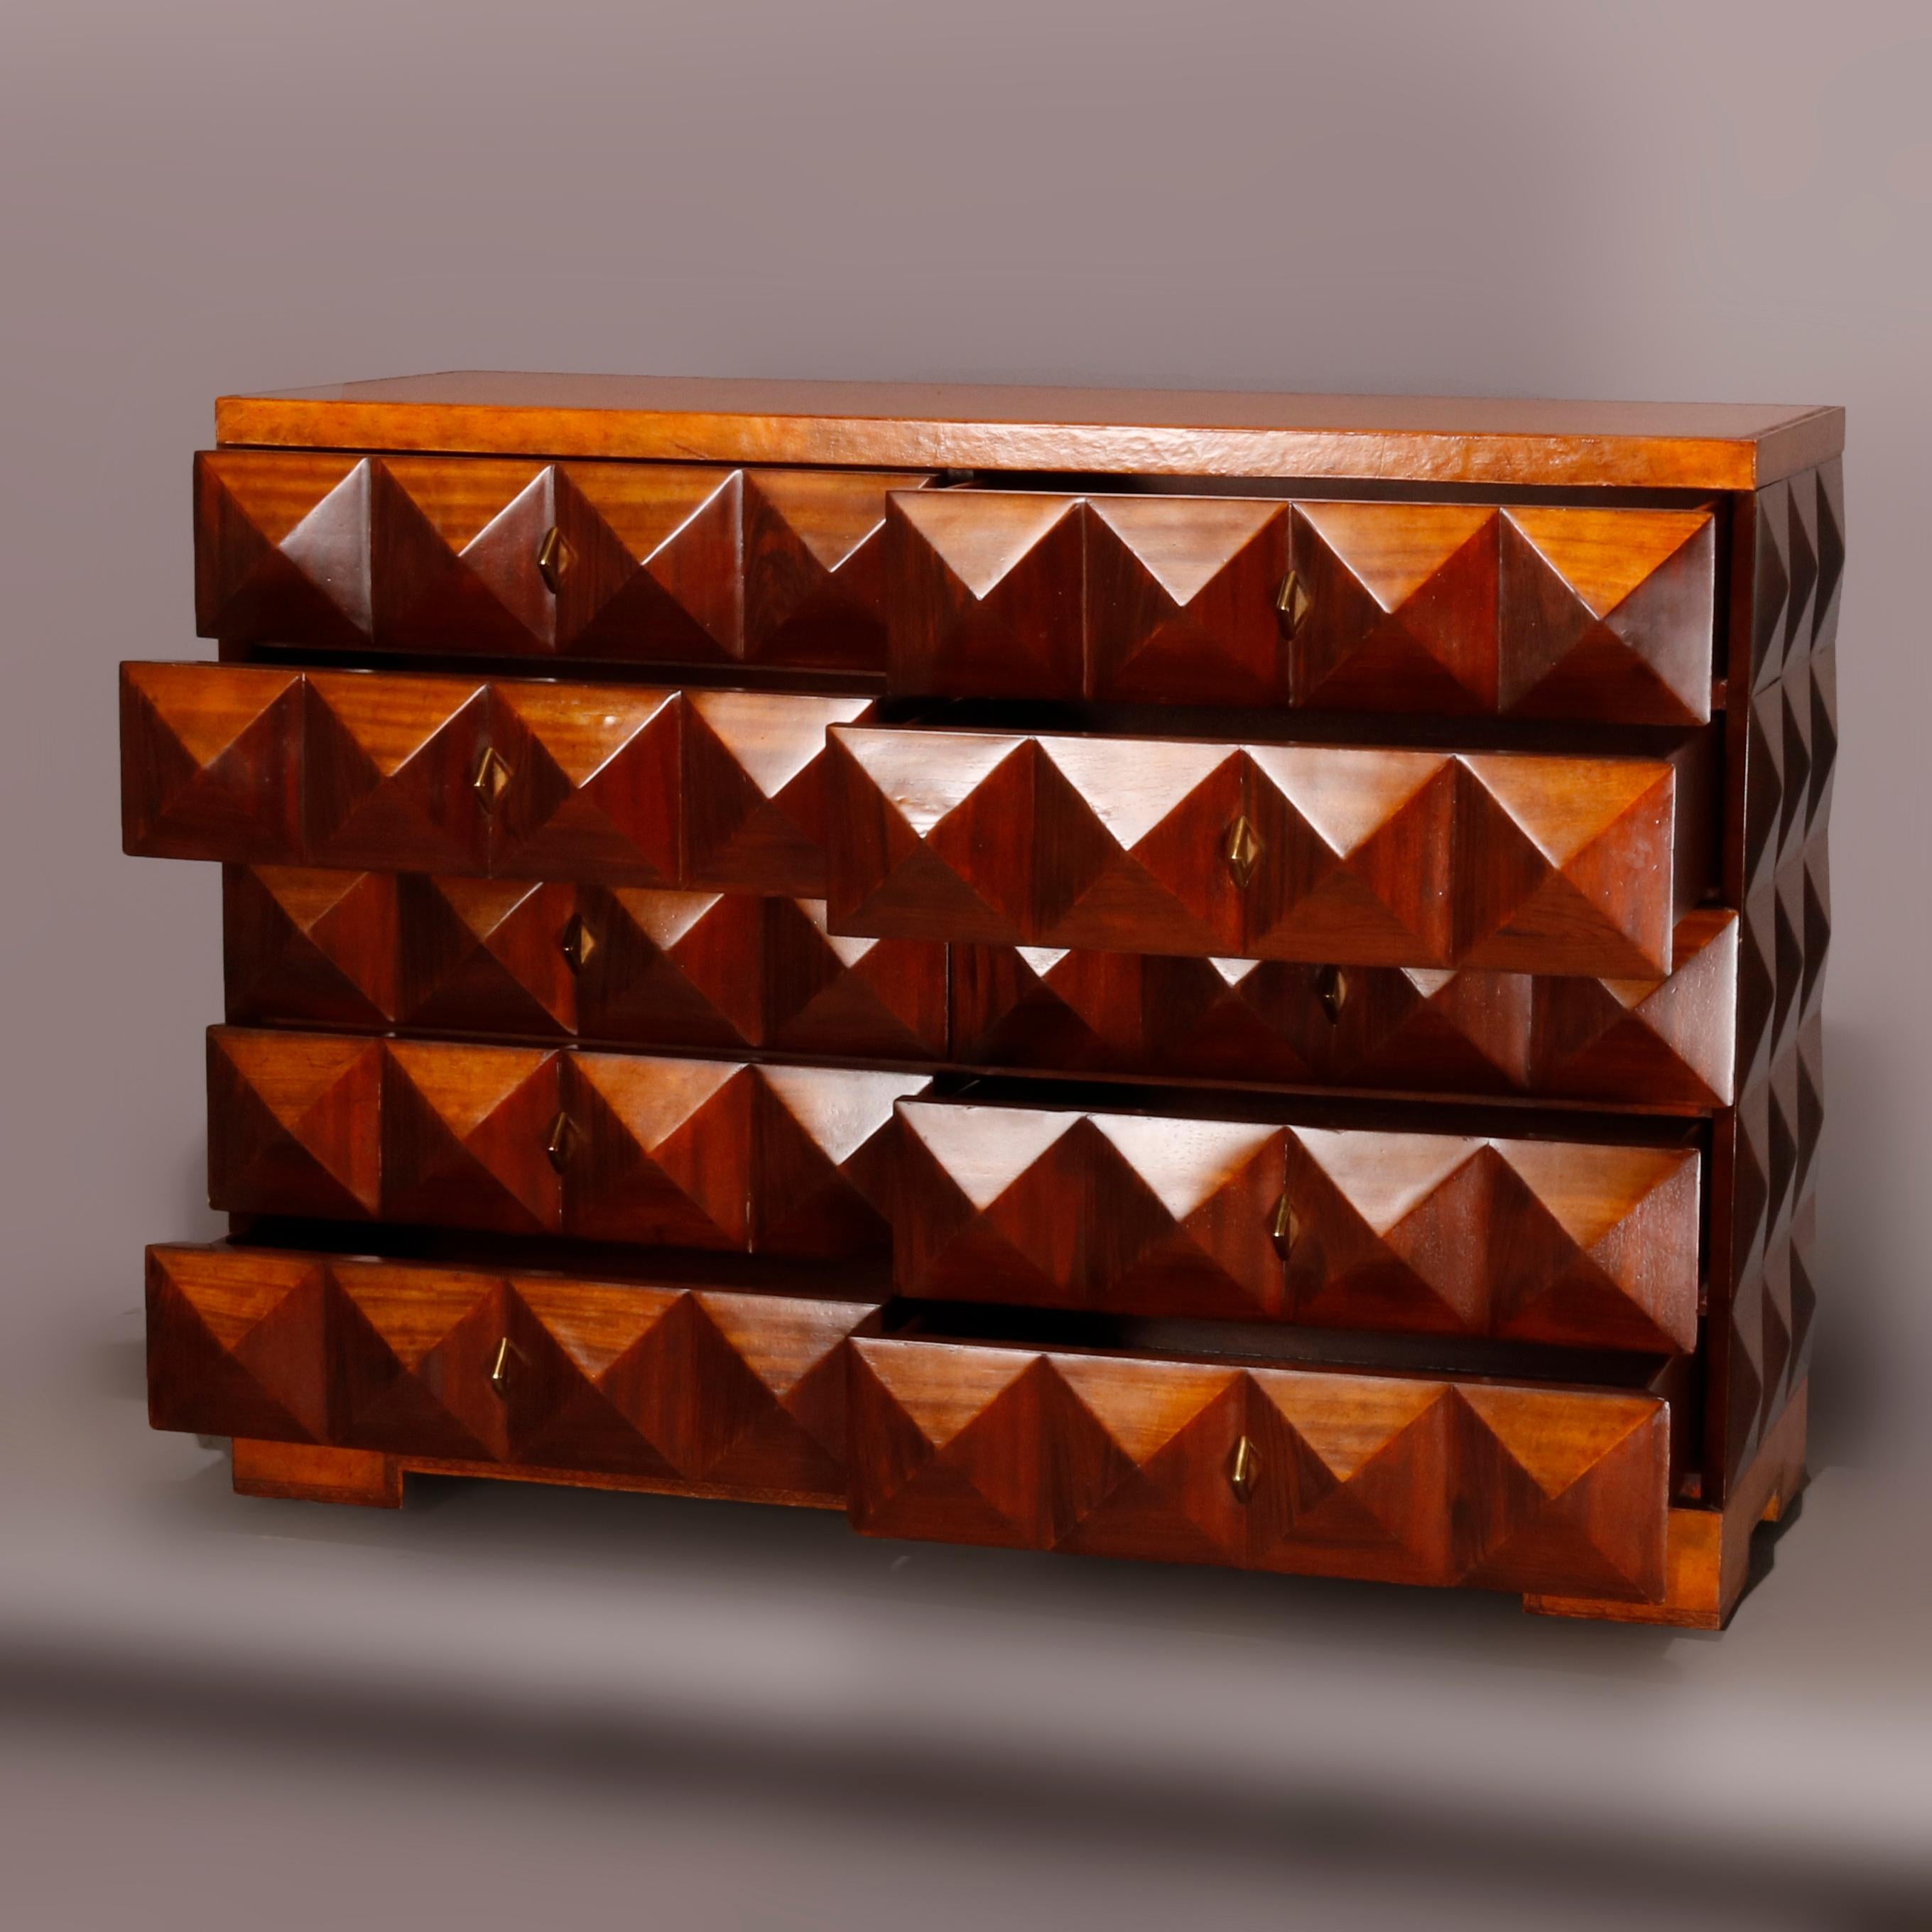 A Mid-Century Modern chest by Maitland Smith offers mahogany construction with repeating pattern of faceted geometric pyramid studs throughout and ten drawers, en verso and drawer maker labels, mid-20th century.

Measures: 33.5